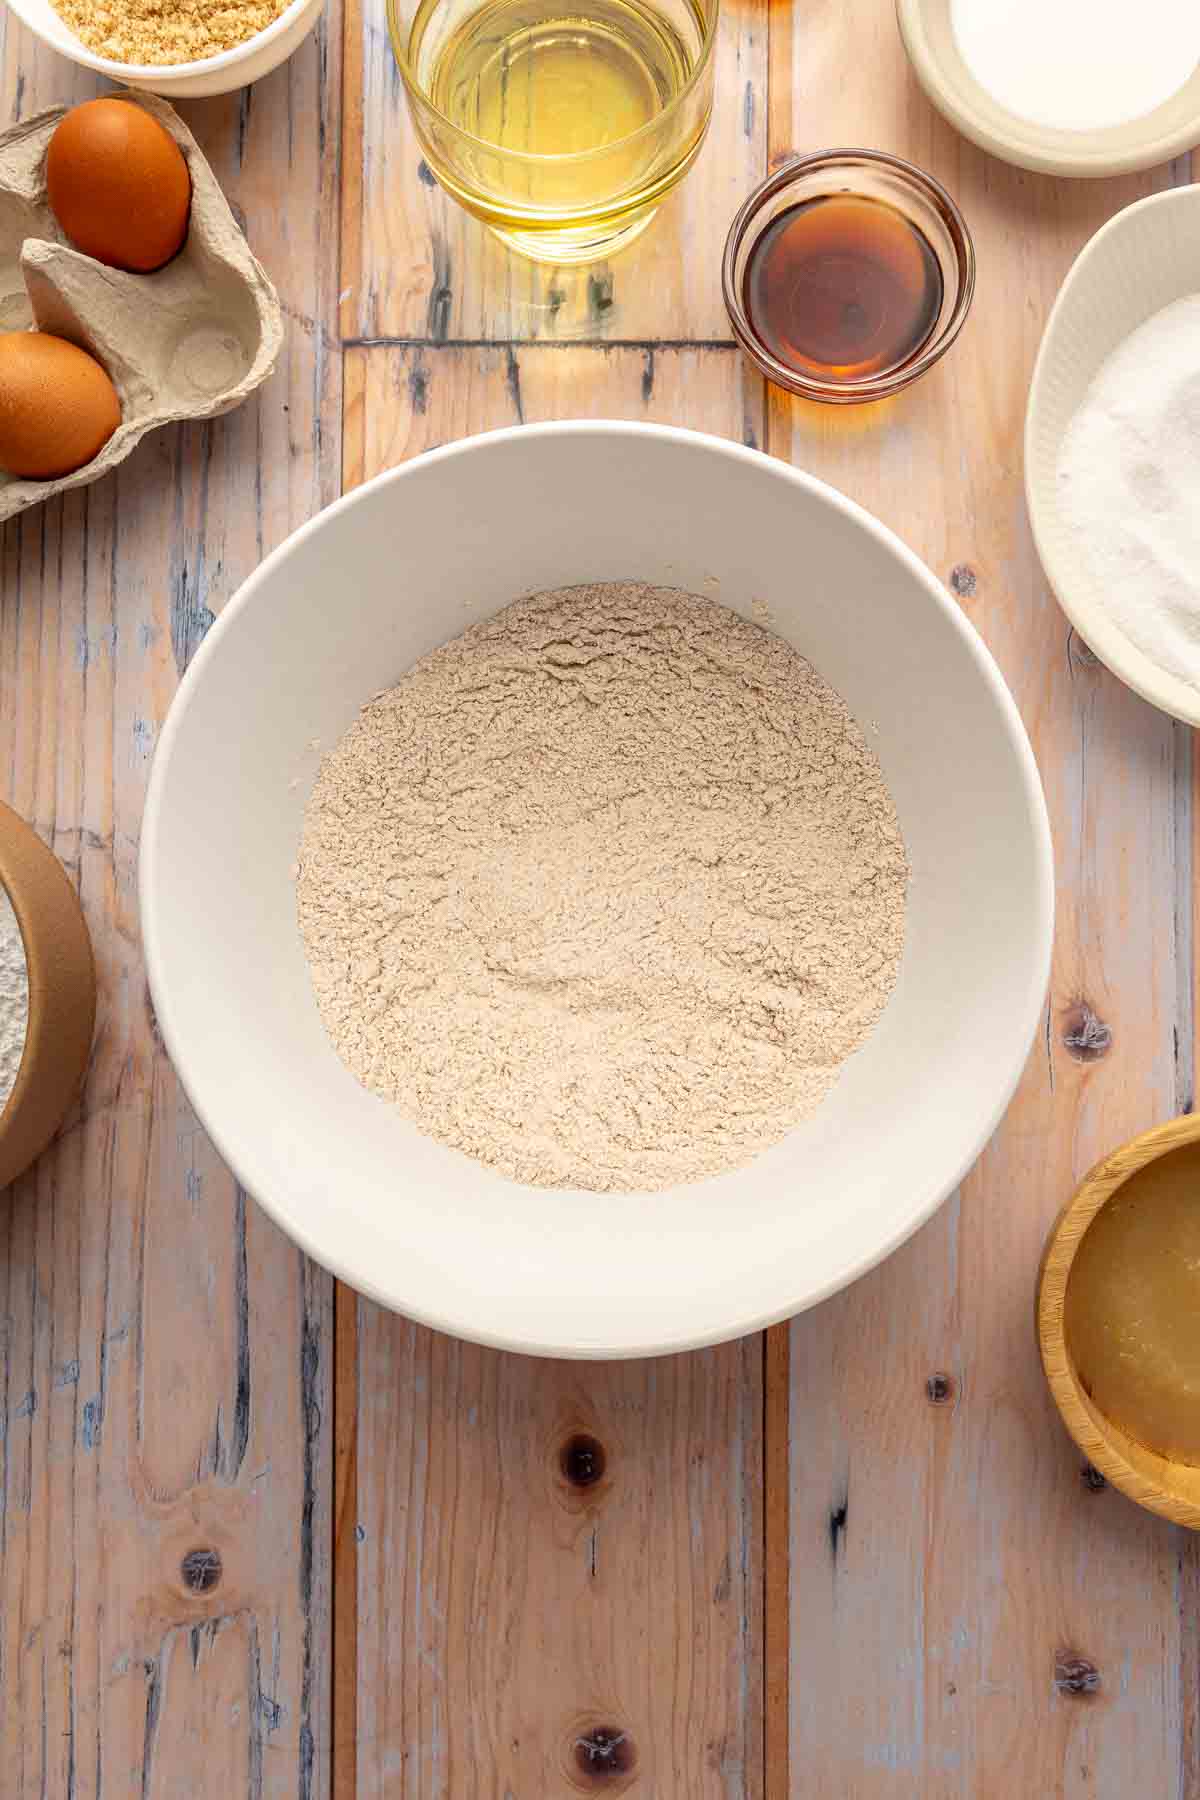 Flour mixture in a large white bowl.